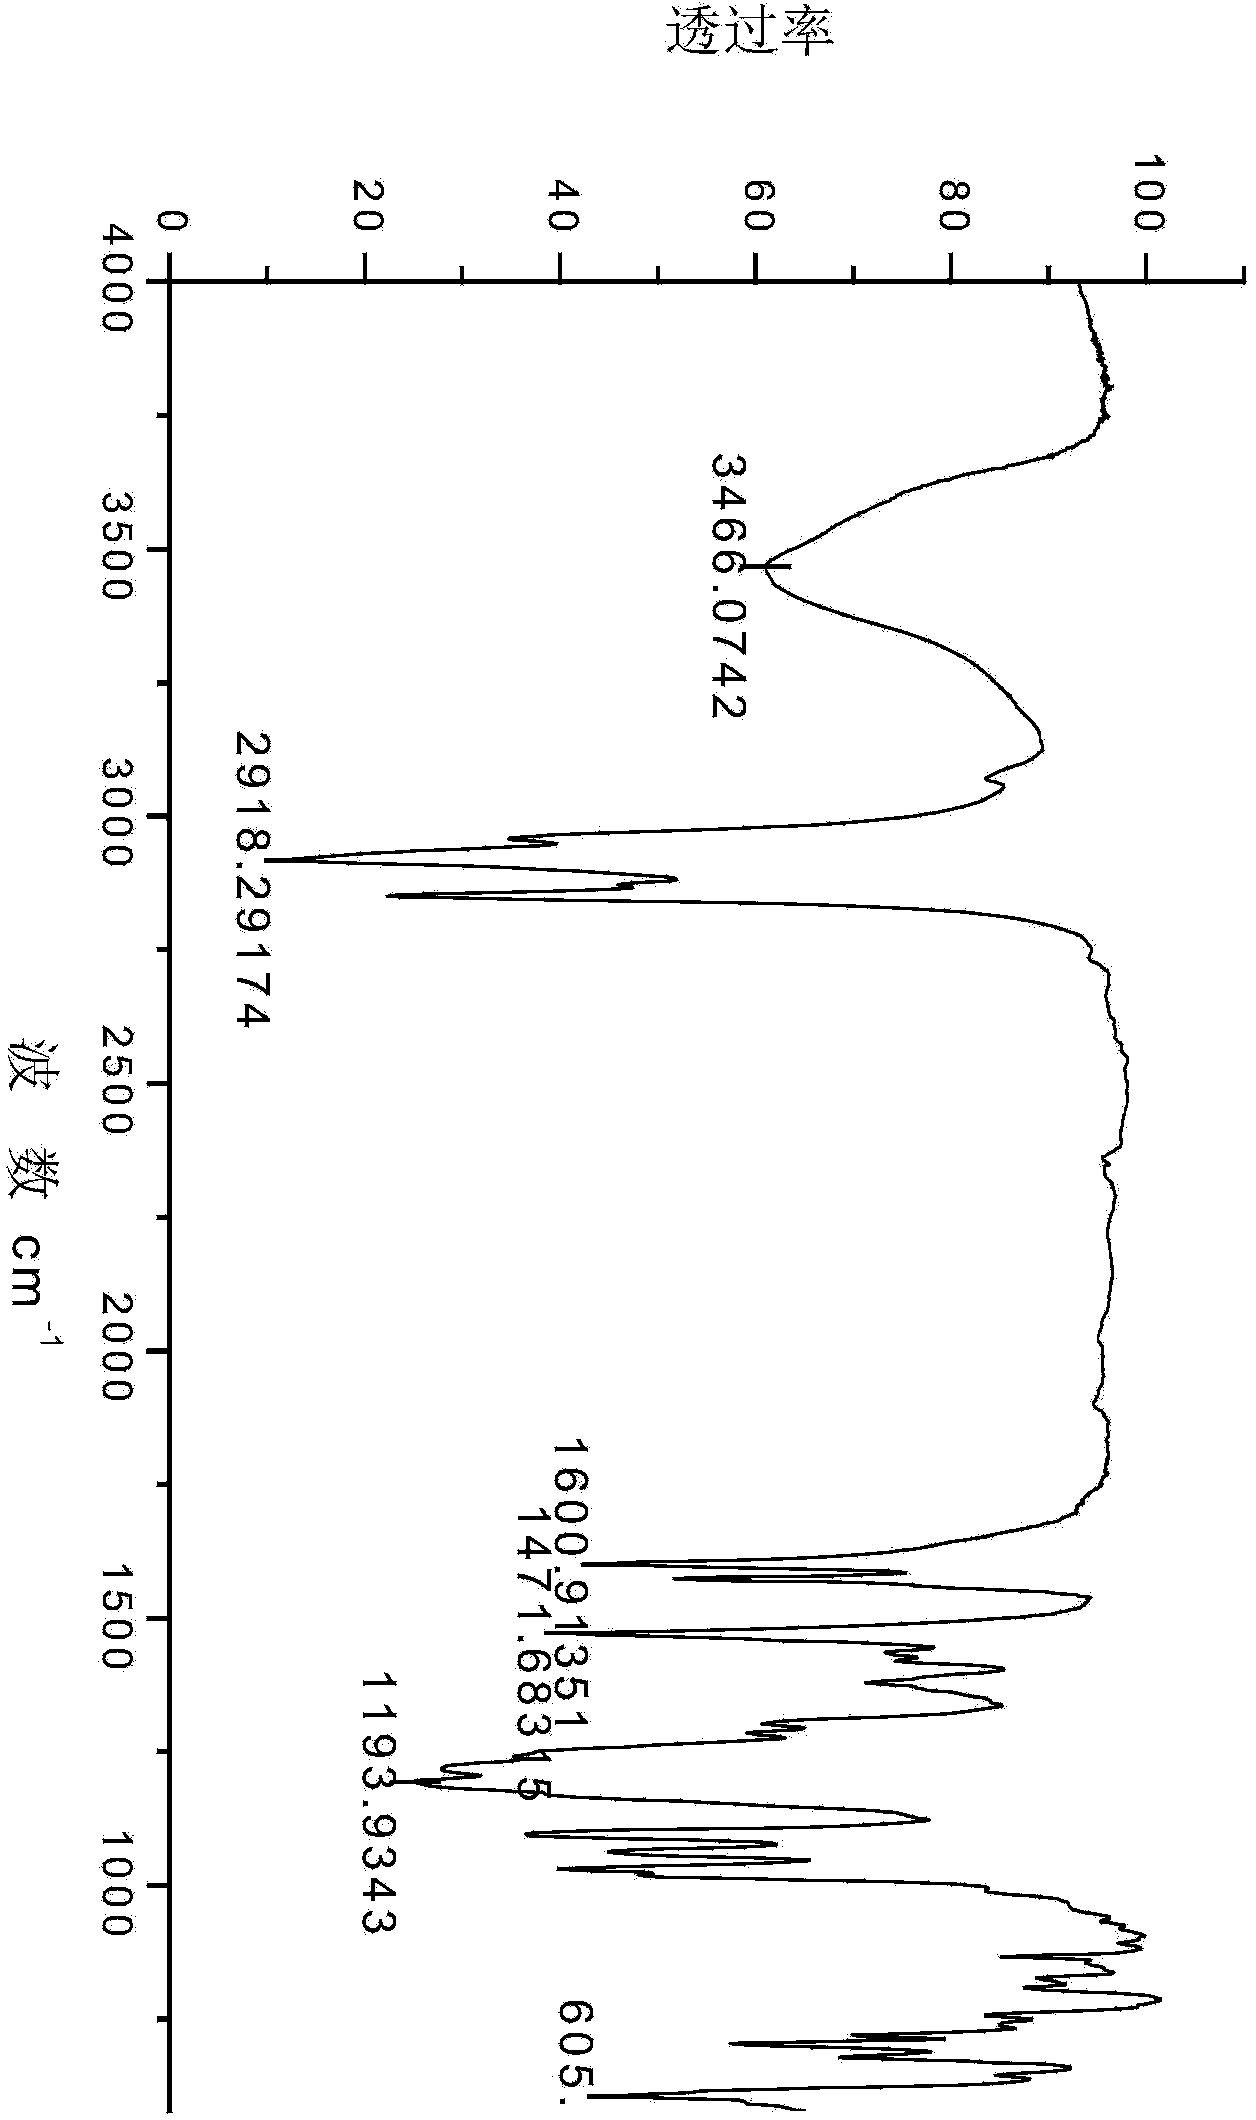 Saturated anacardol ether sulfonate surfactant as well as preparation method and application thereof